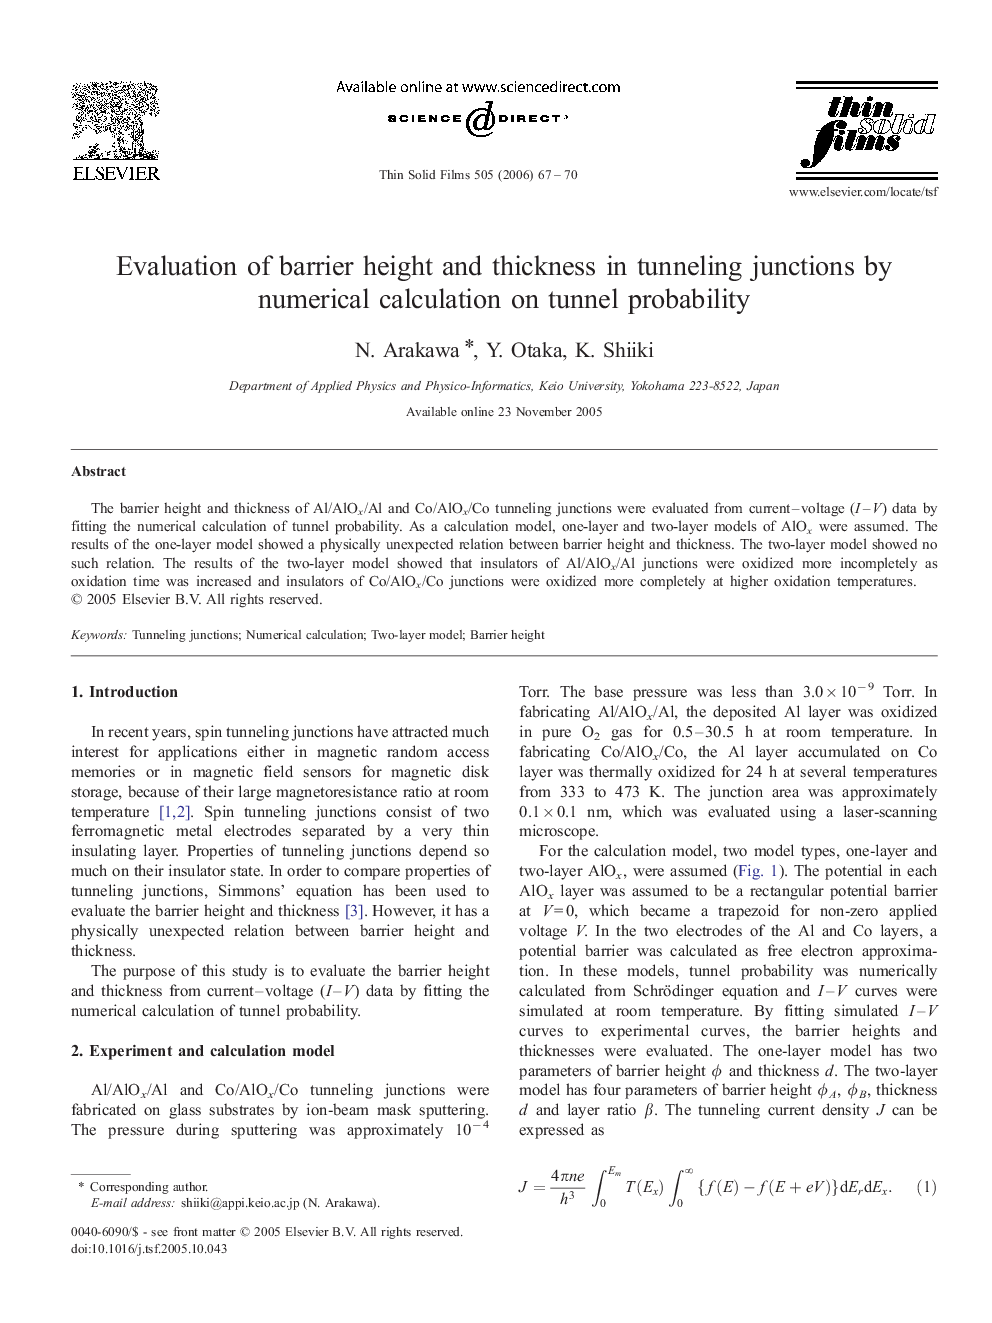 Evaluation of barrier height and thickness in tunneling junctions by numerical calculation on tunnel probability